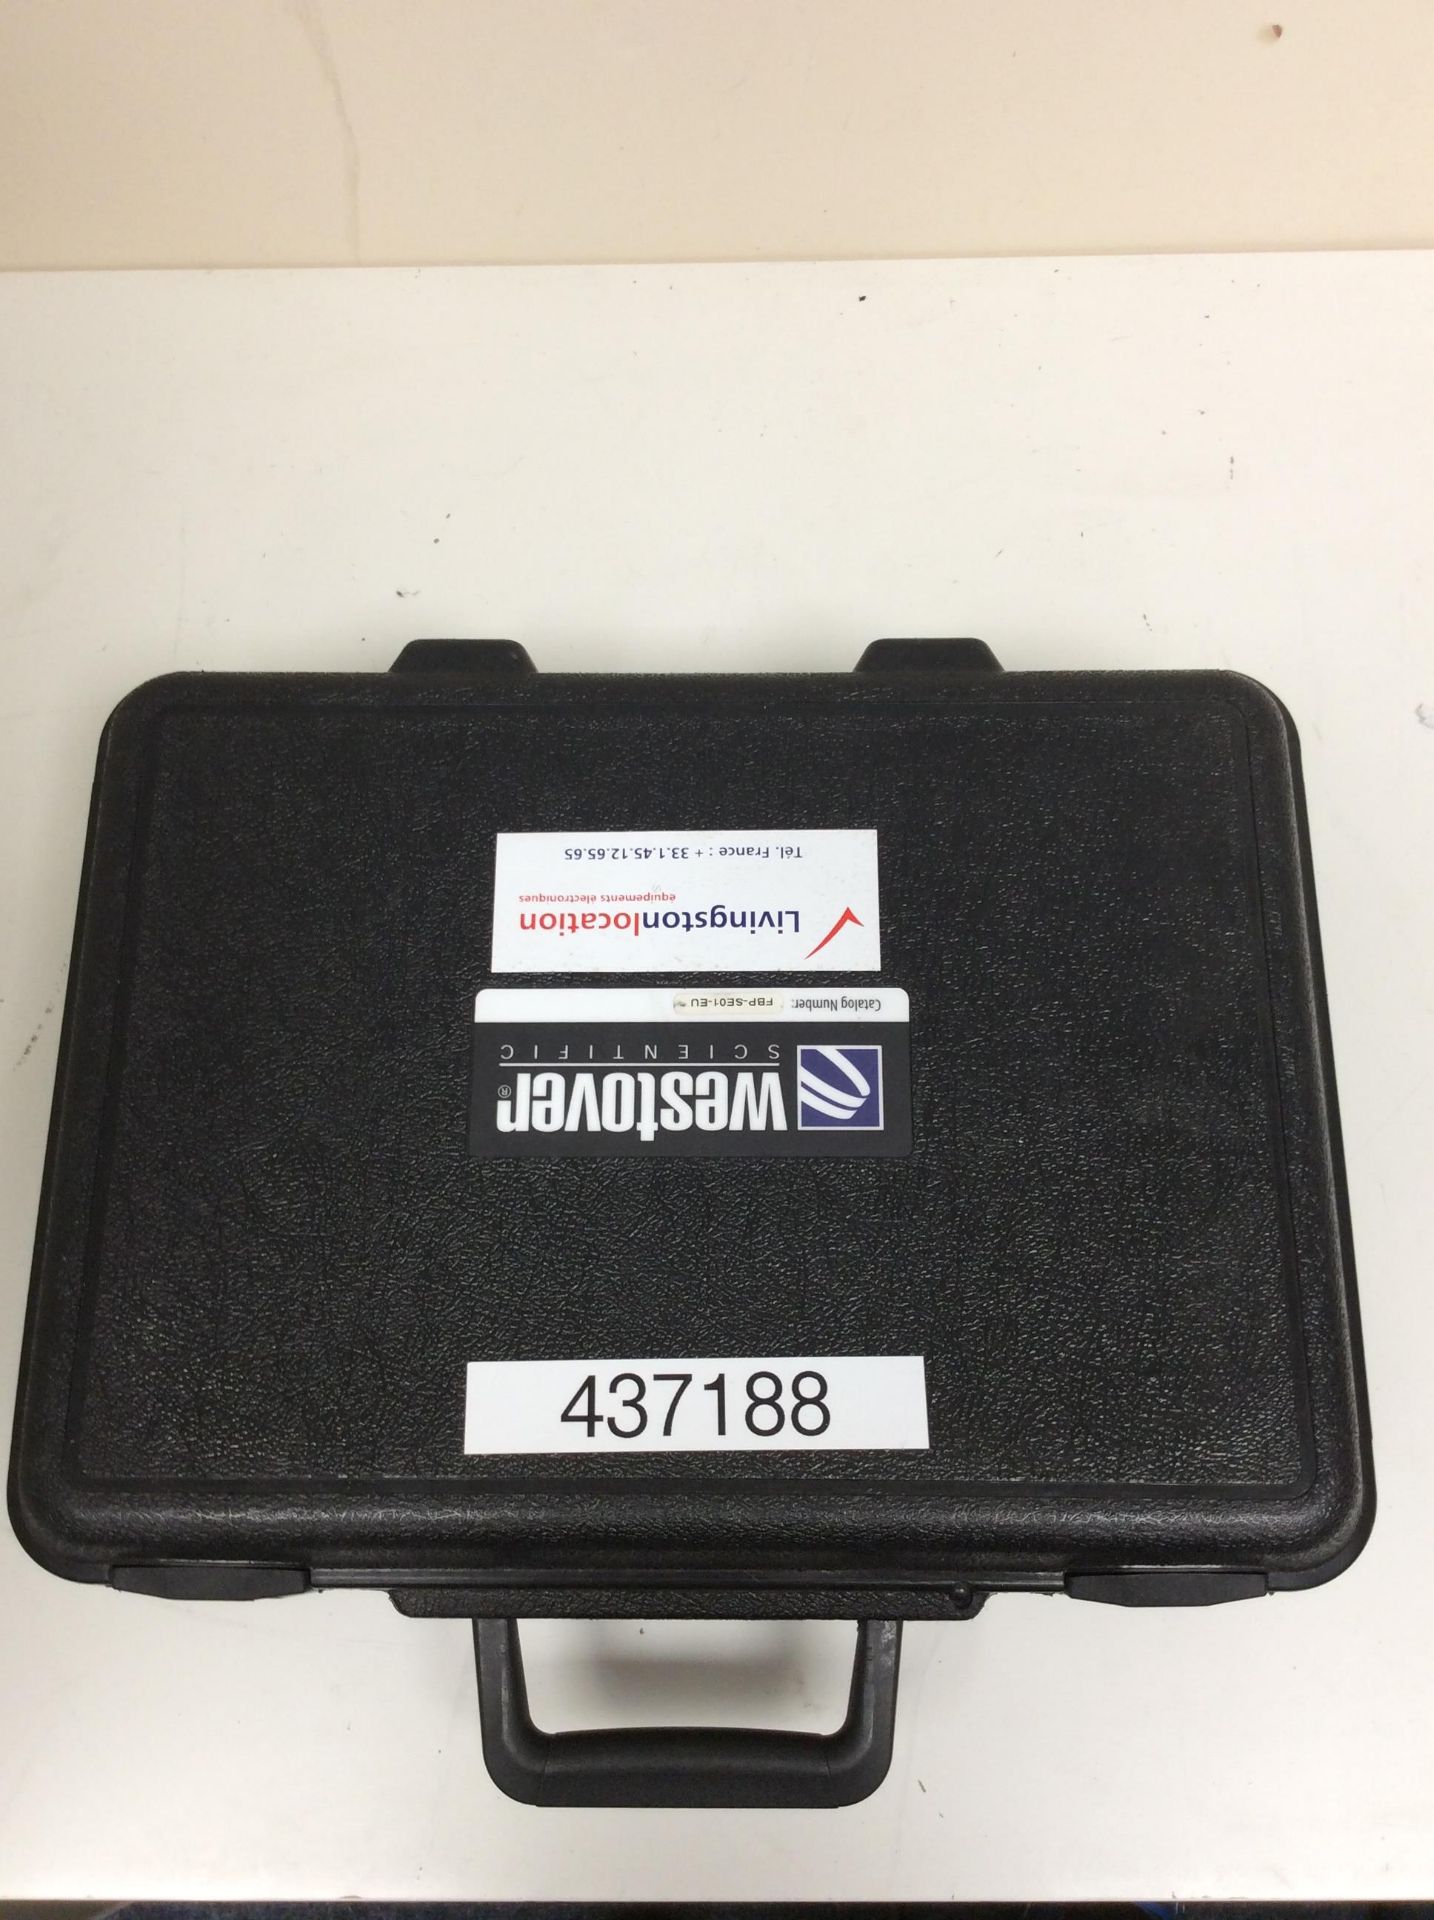 Westover zp-hde-9020 in carry case fbp probe microsc0pe and hd2 display - Image 2 of 2